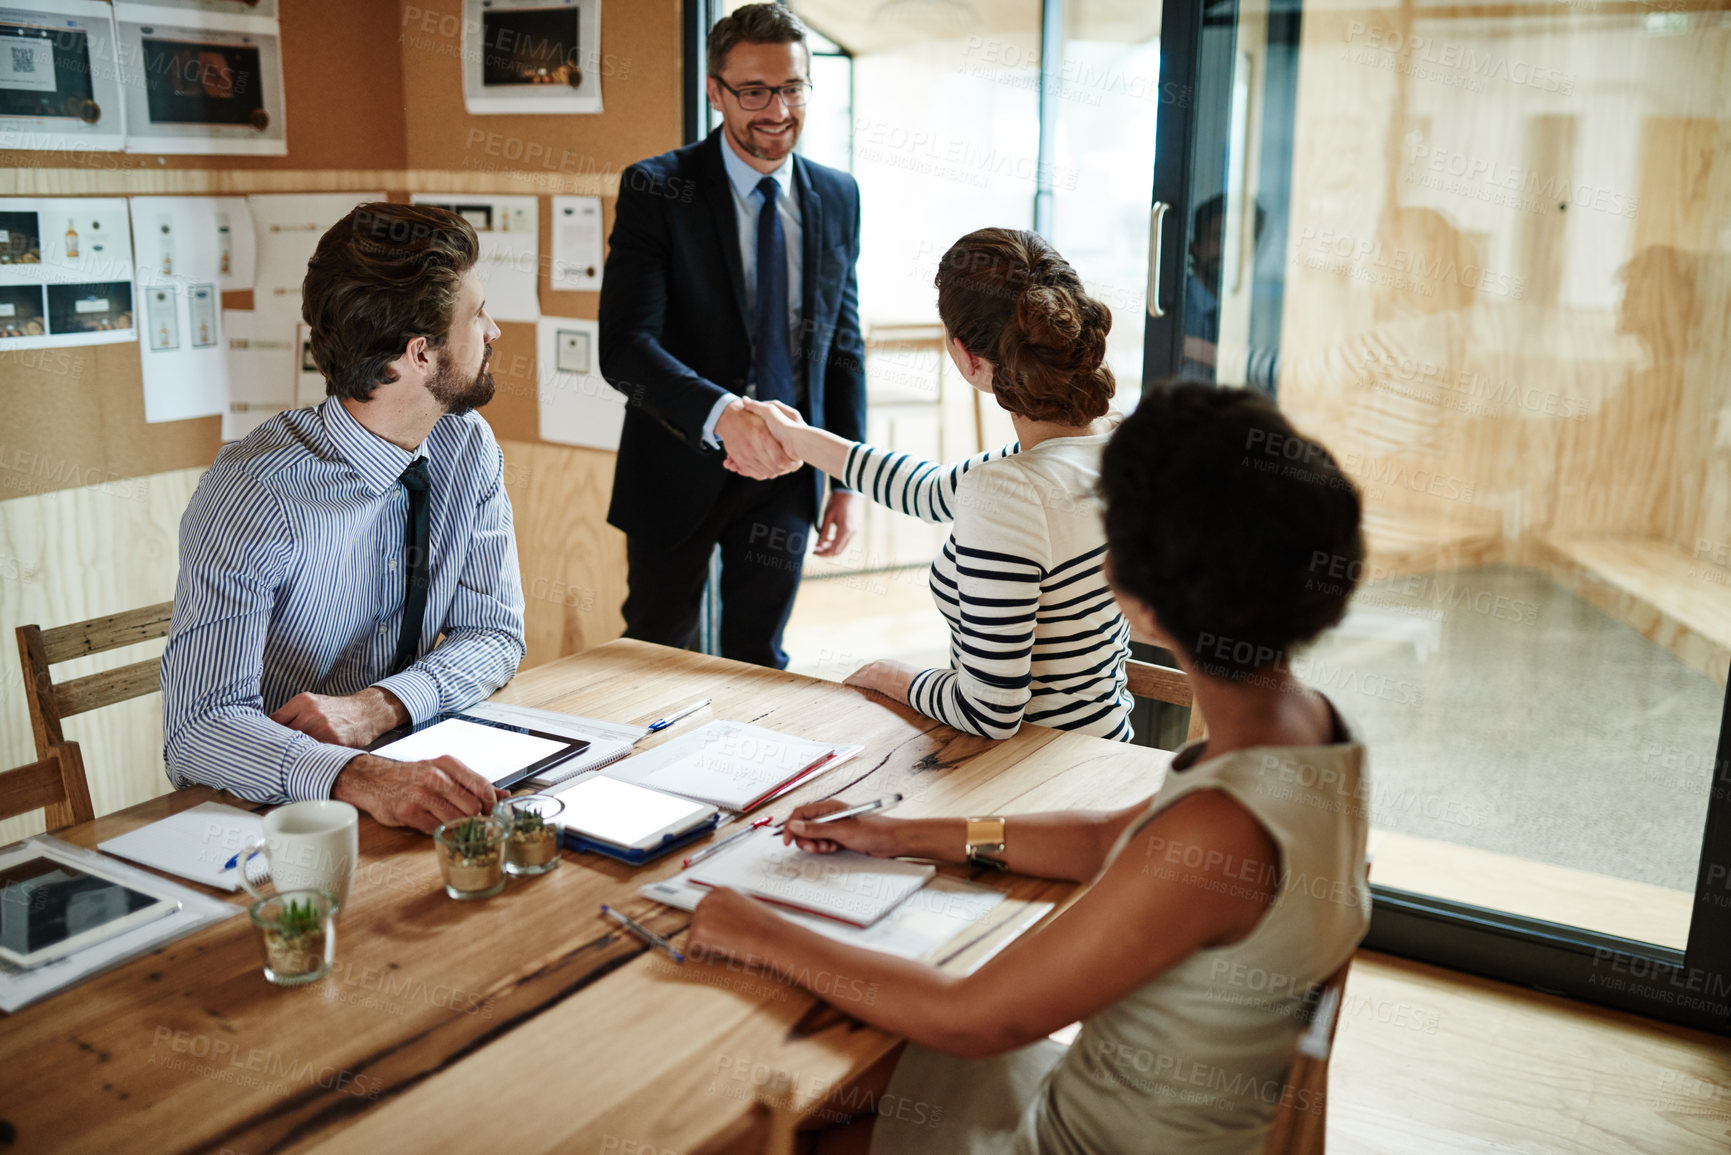 Buy stock photo Shot of two businesspeople shaking hands in an office while colleagues look on